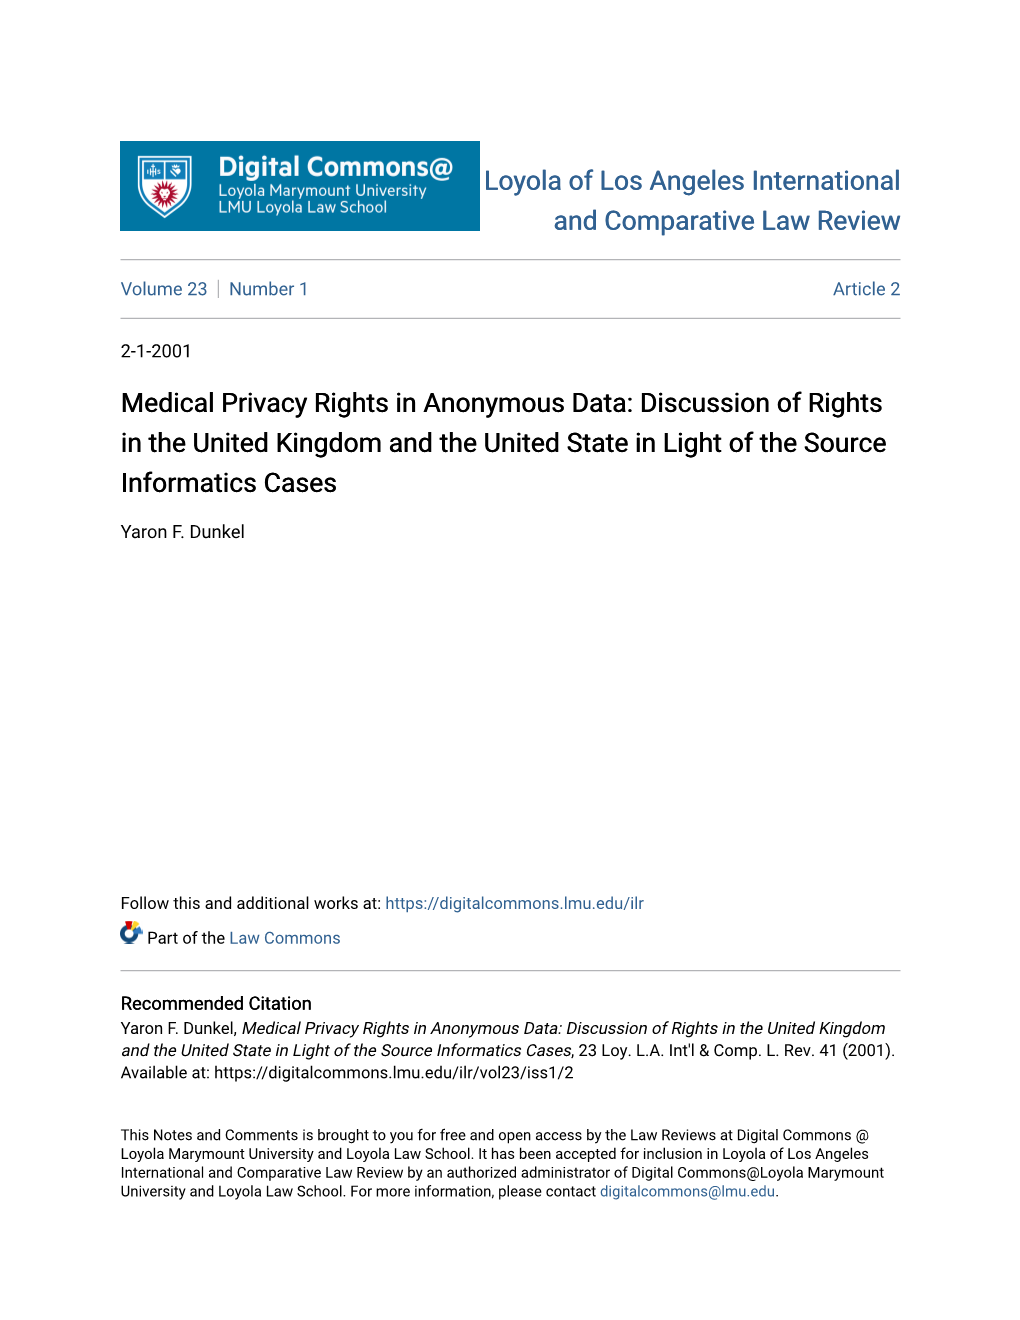 Medical Privacy Rights in Anonymous Data: Discussion of Rights in the United Kingdom and the United State in Light of the Source Informatics Cases